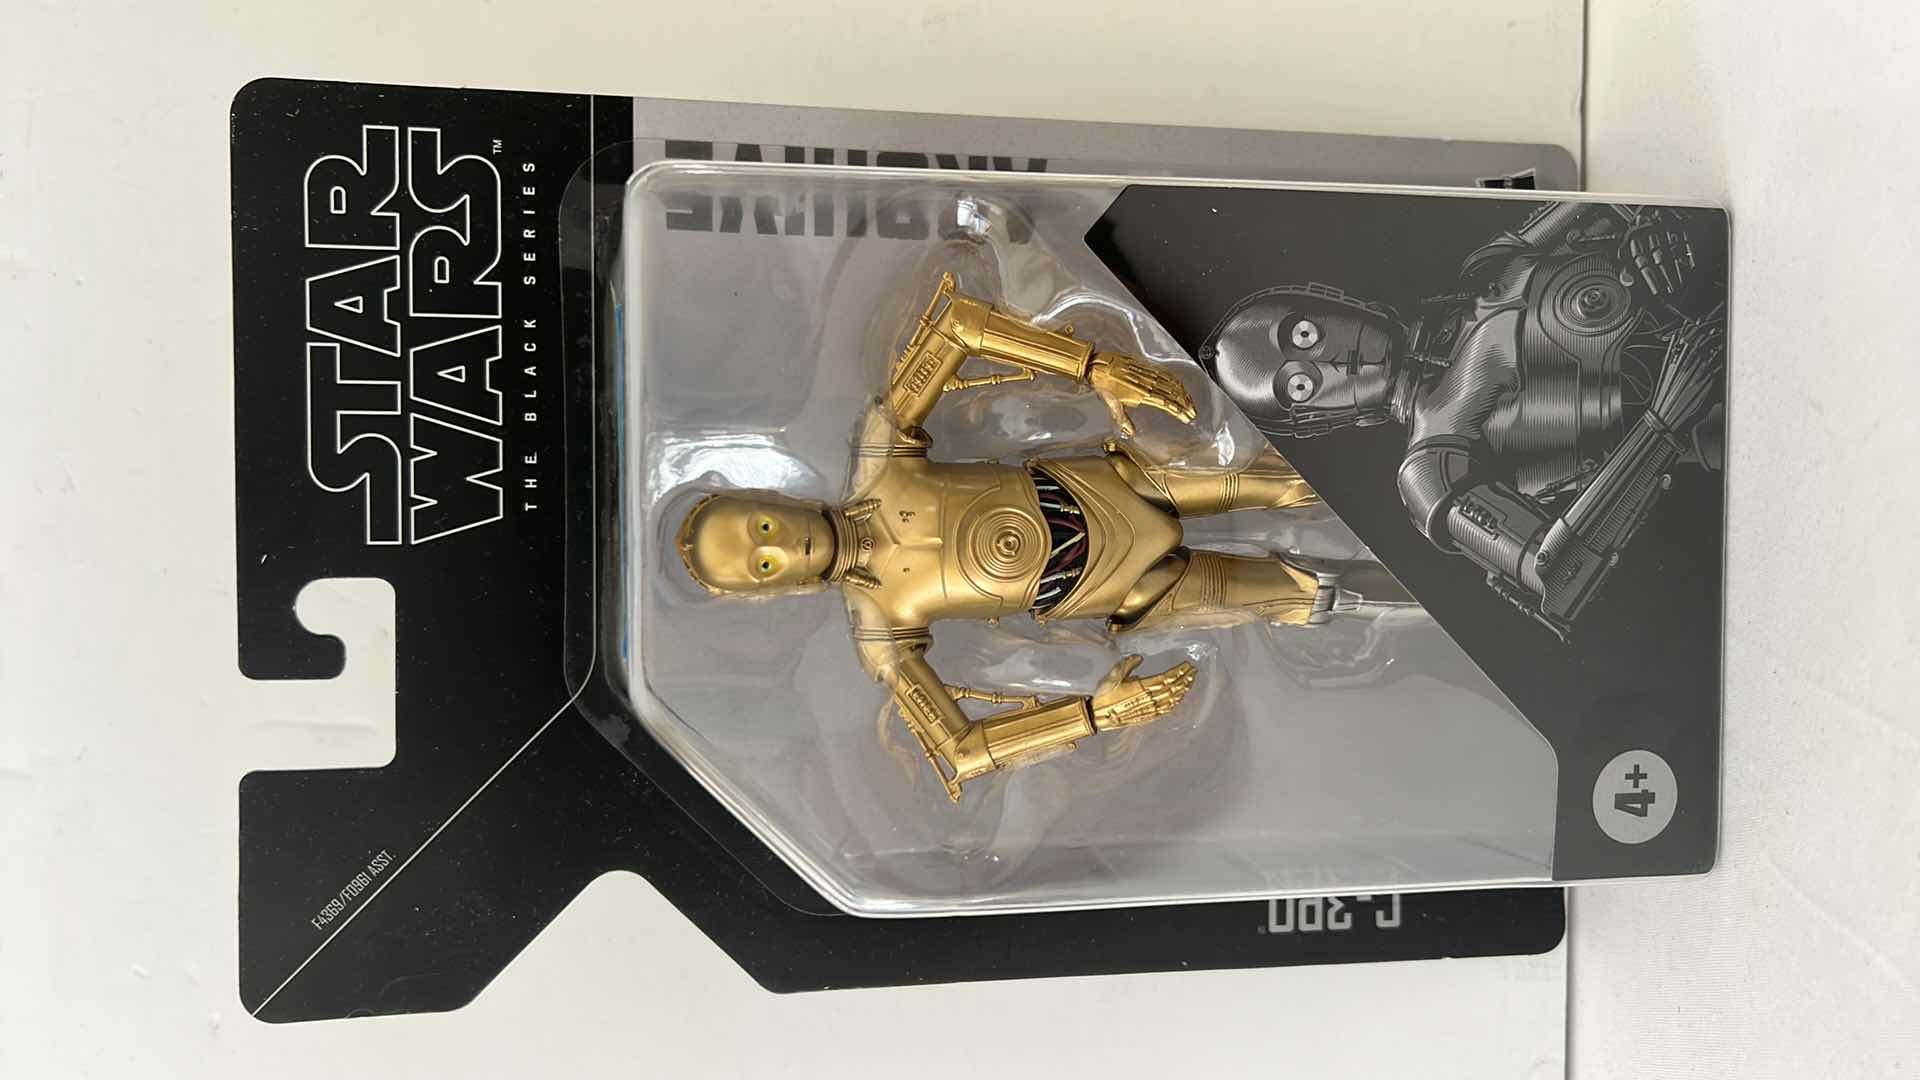 Photo 1 of BRAND NEW STAR WARS THE BLACK SERIES “C-3PO” ACTION FIGURE $29